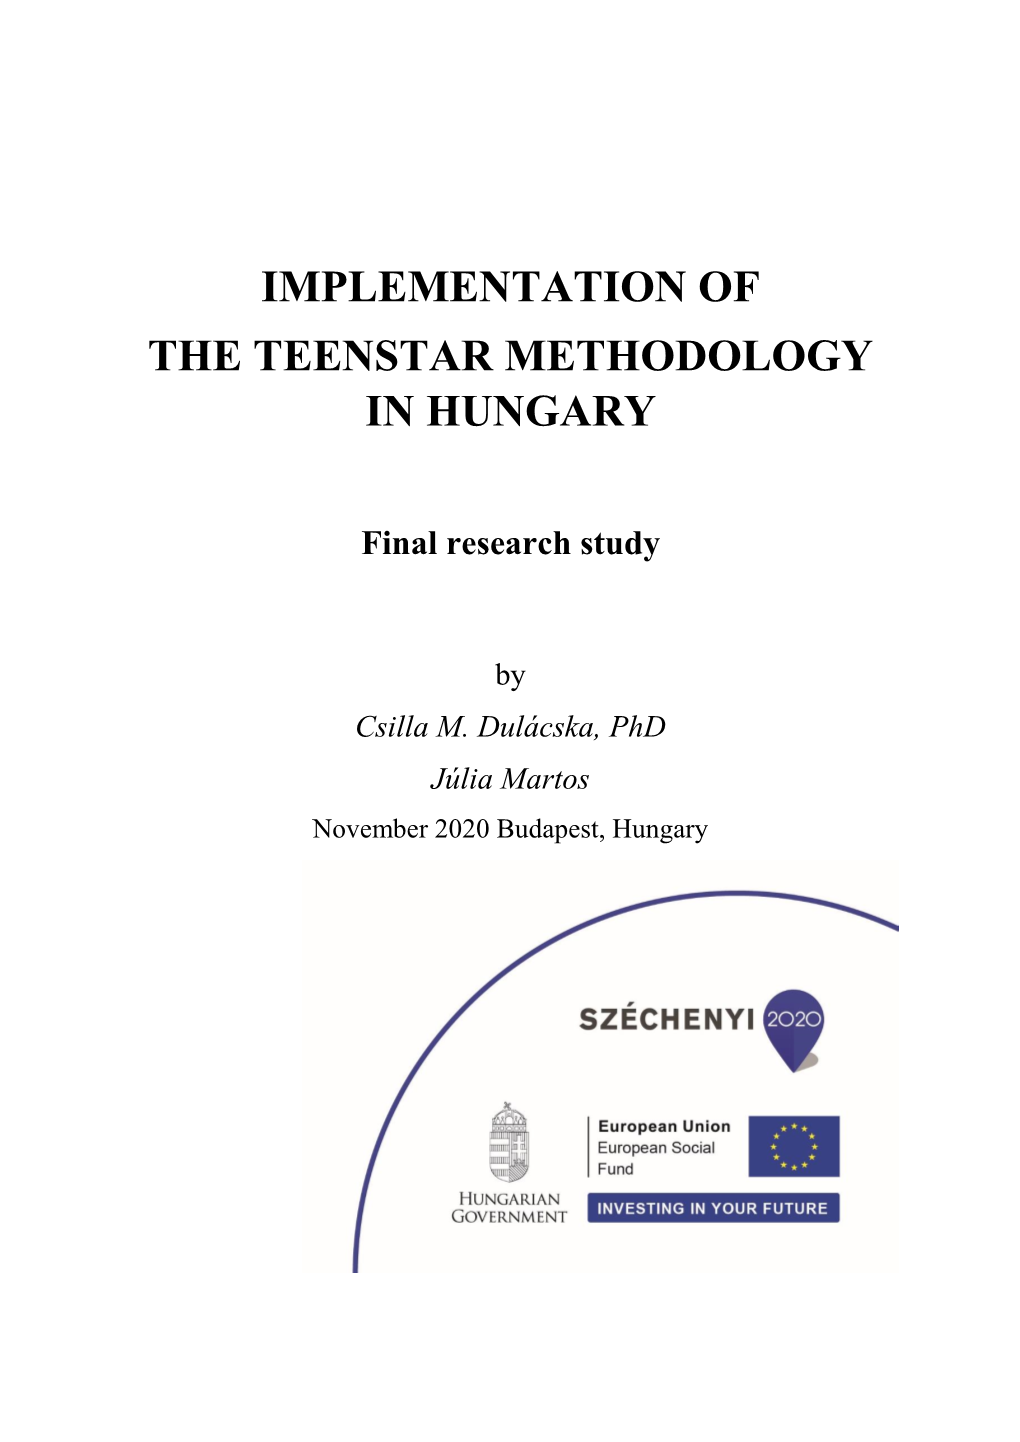 Implementation of the Teenstar Methodology in Hungary